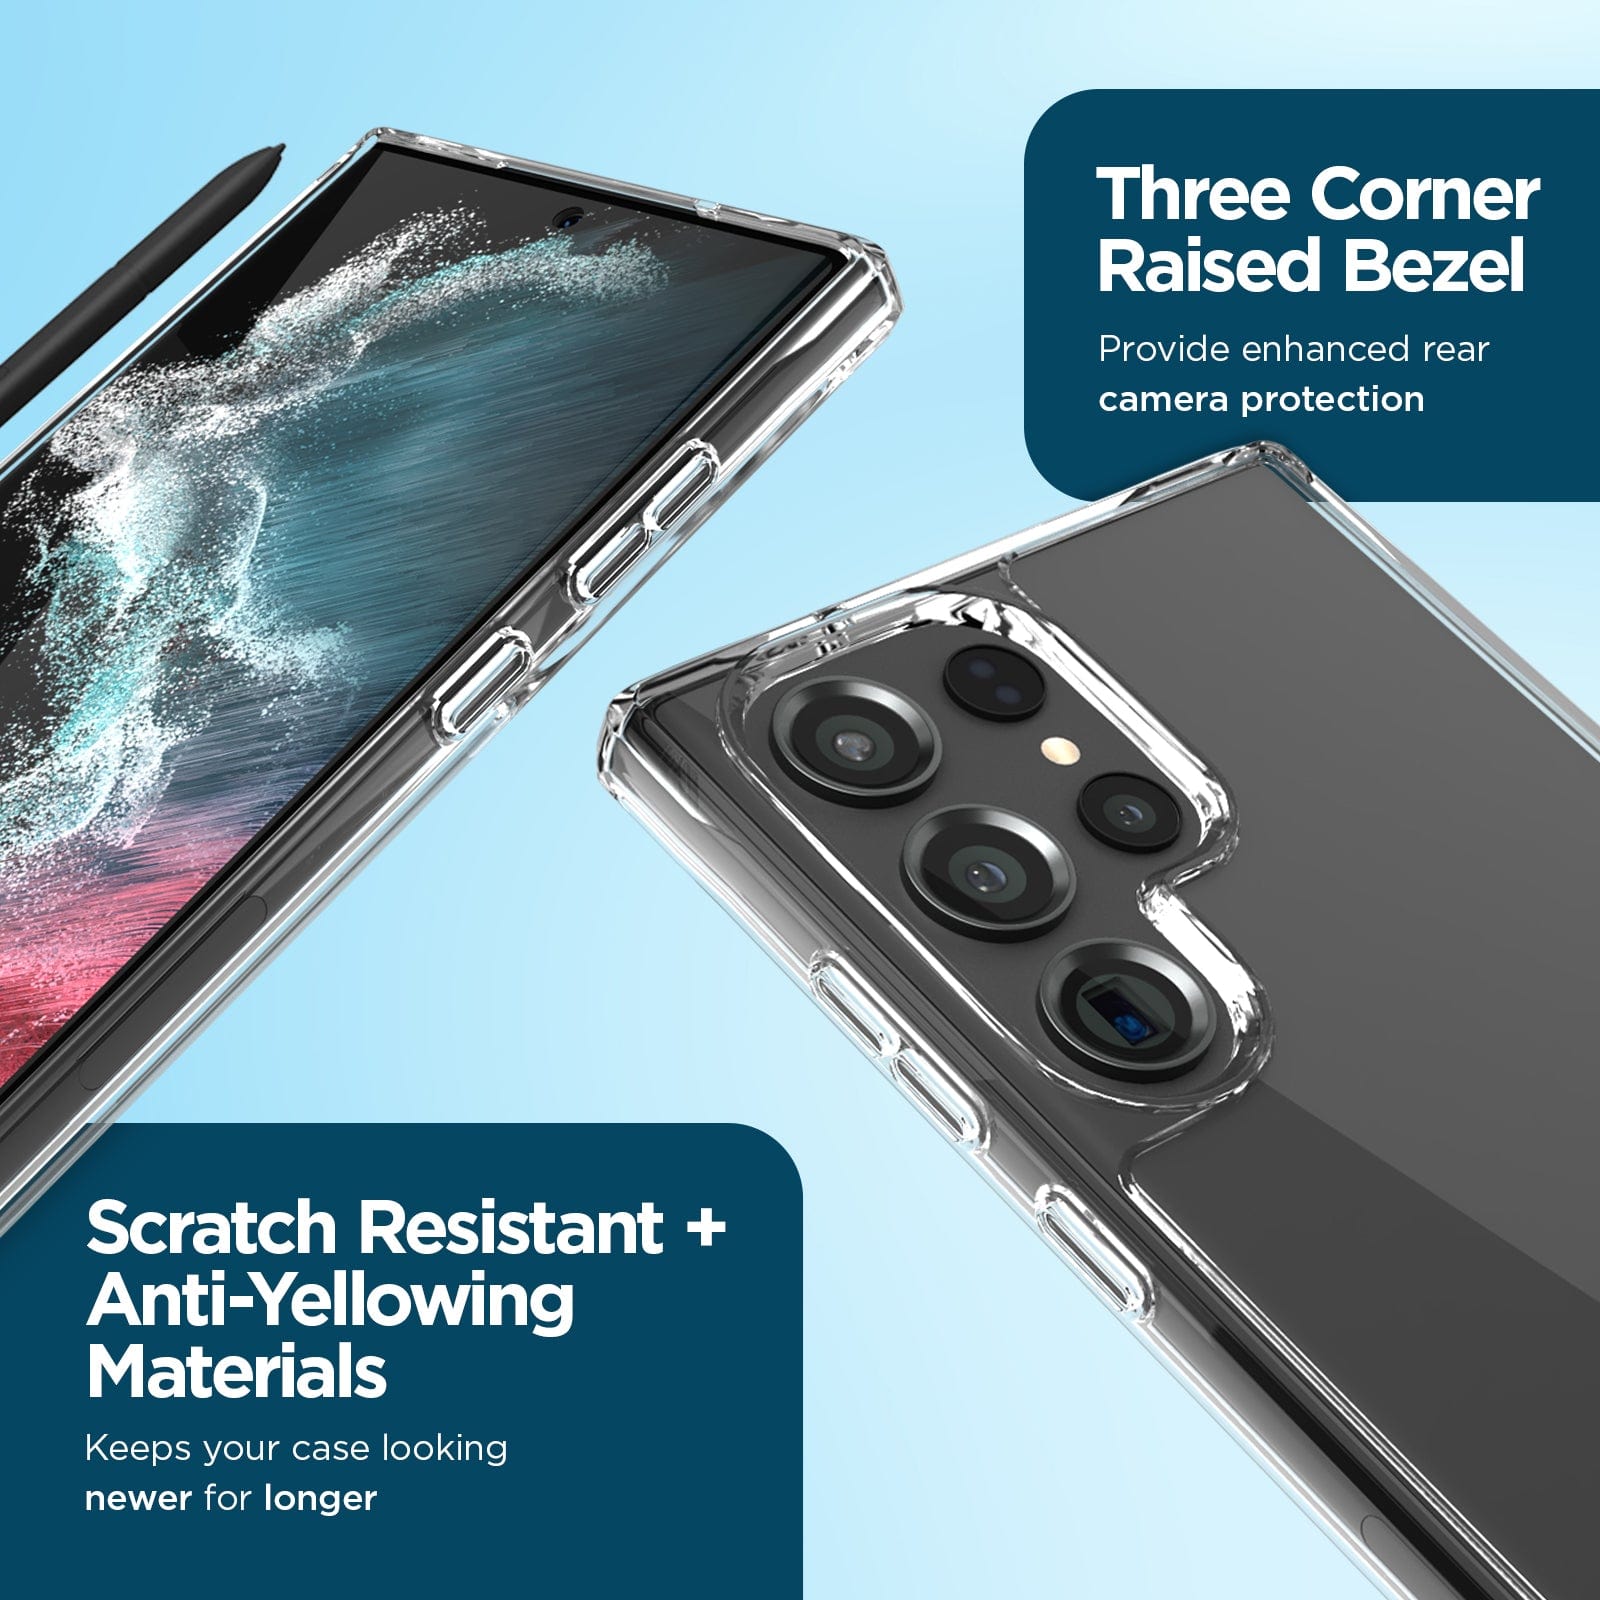 THREE CORNER RAISED BEZEL. PROVIDE ENHANCED REAR CAMERA PROTECTION. SCRATCH RESISTANT + ANTI-YELLOWING MATERIALS. KEEPS YOUR CASE LOOKING NEWER FOR LONGER.